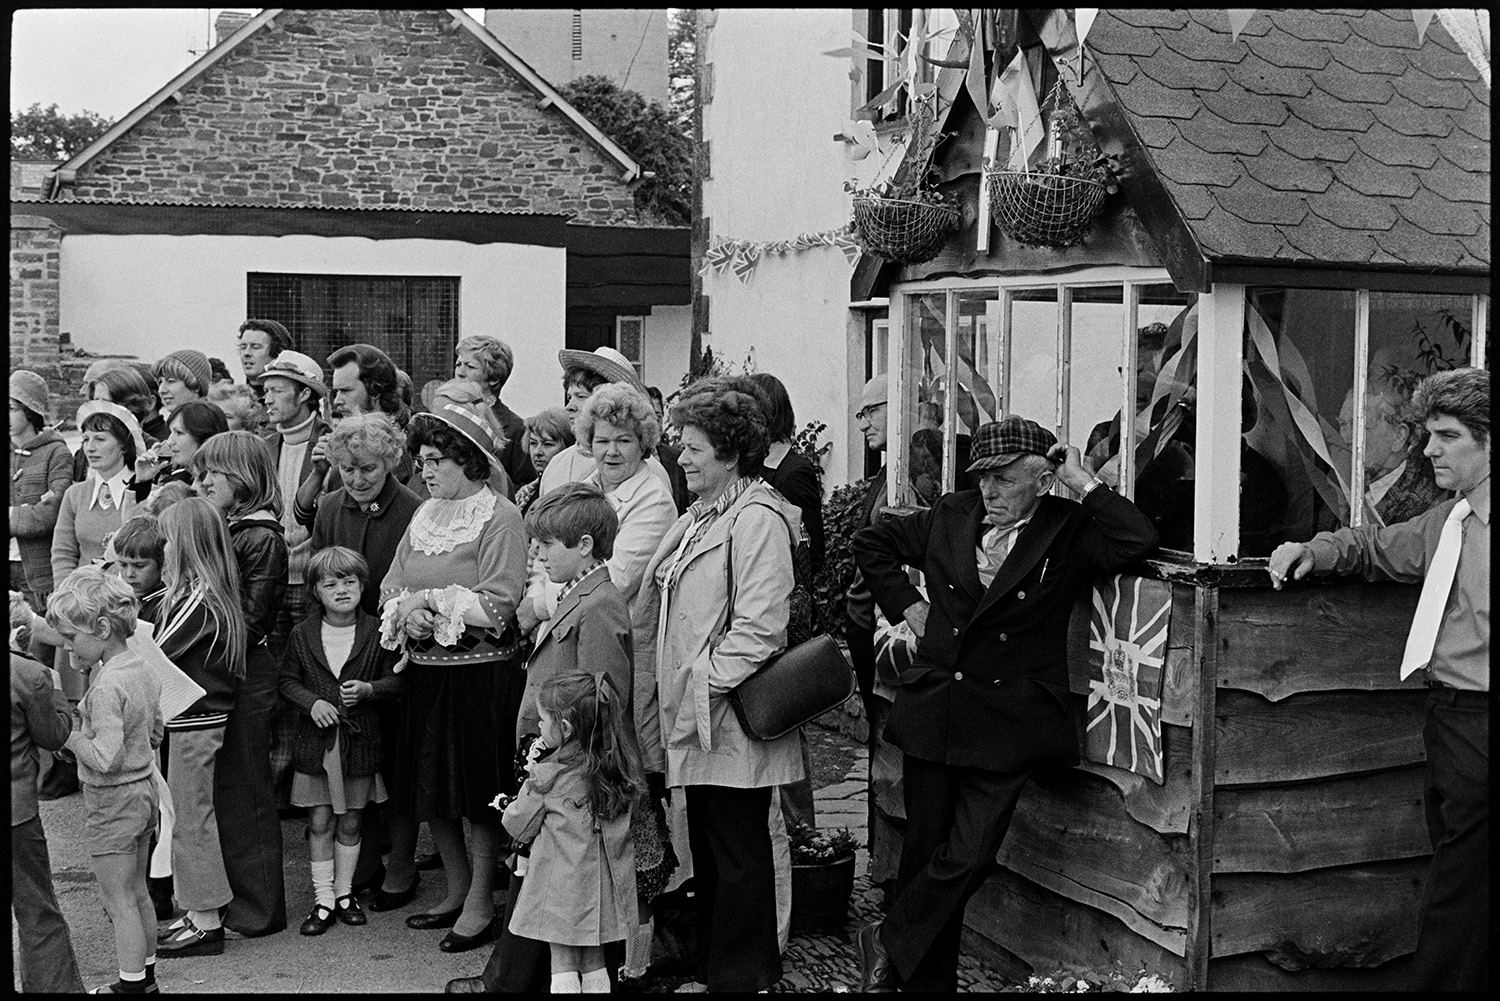 Spectators in square, Jubilee Day, man with radio. 
[Men, women and children gathered outside the Royal Oak pub in Dolton to watch the celebrations for the Silver Jubilee of Queen Elizabeth II in the village square. The pub is decorated with Union Jack flags and bunting.]